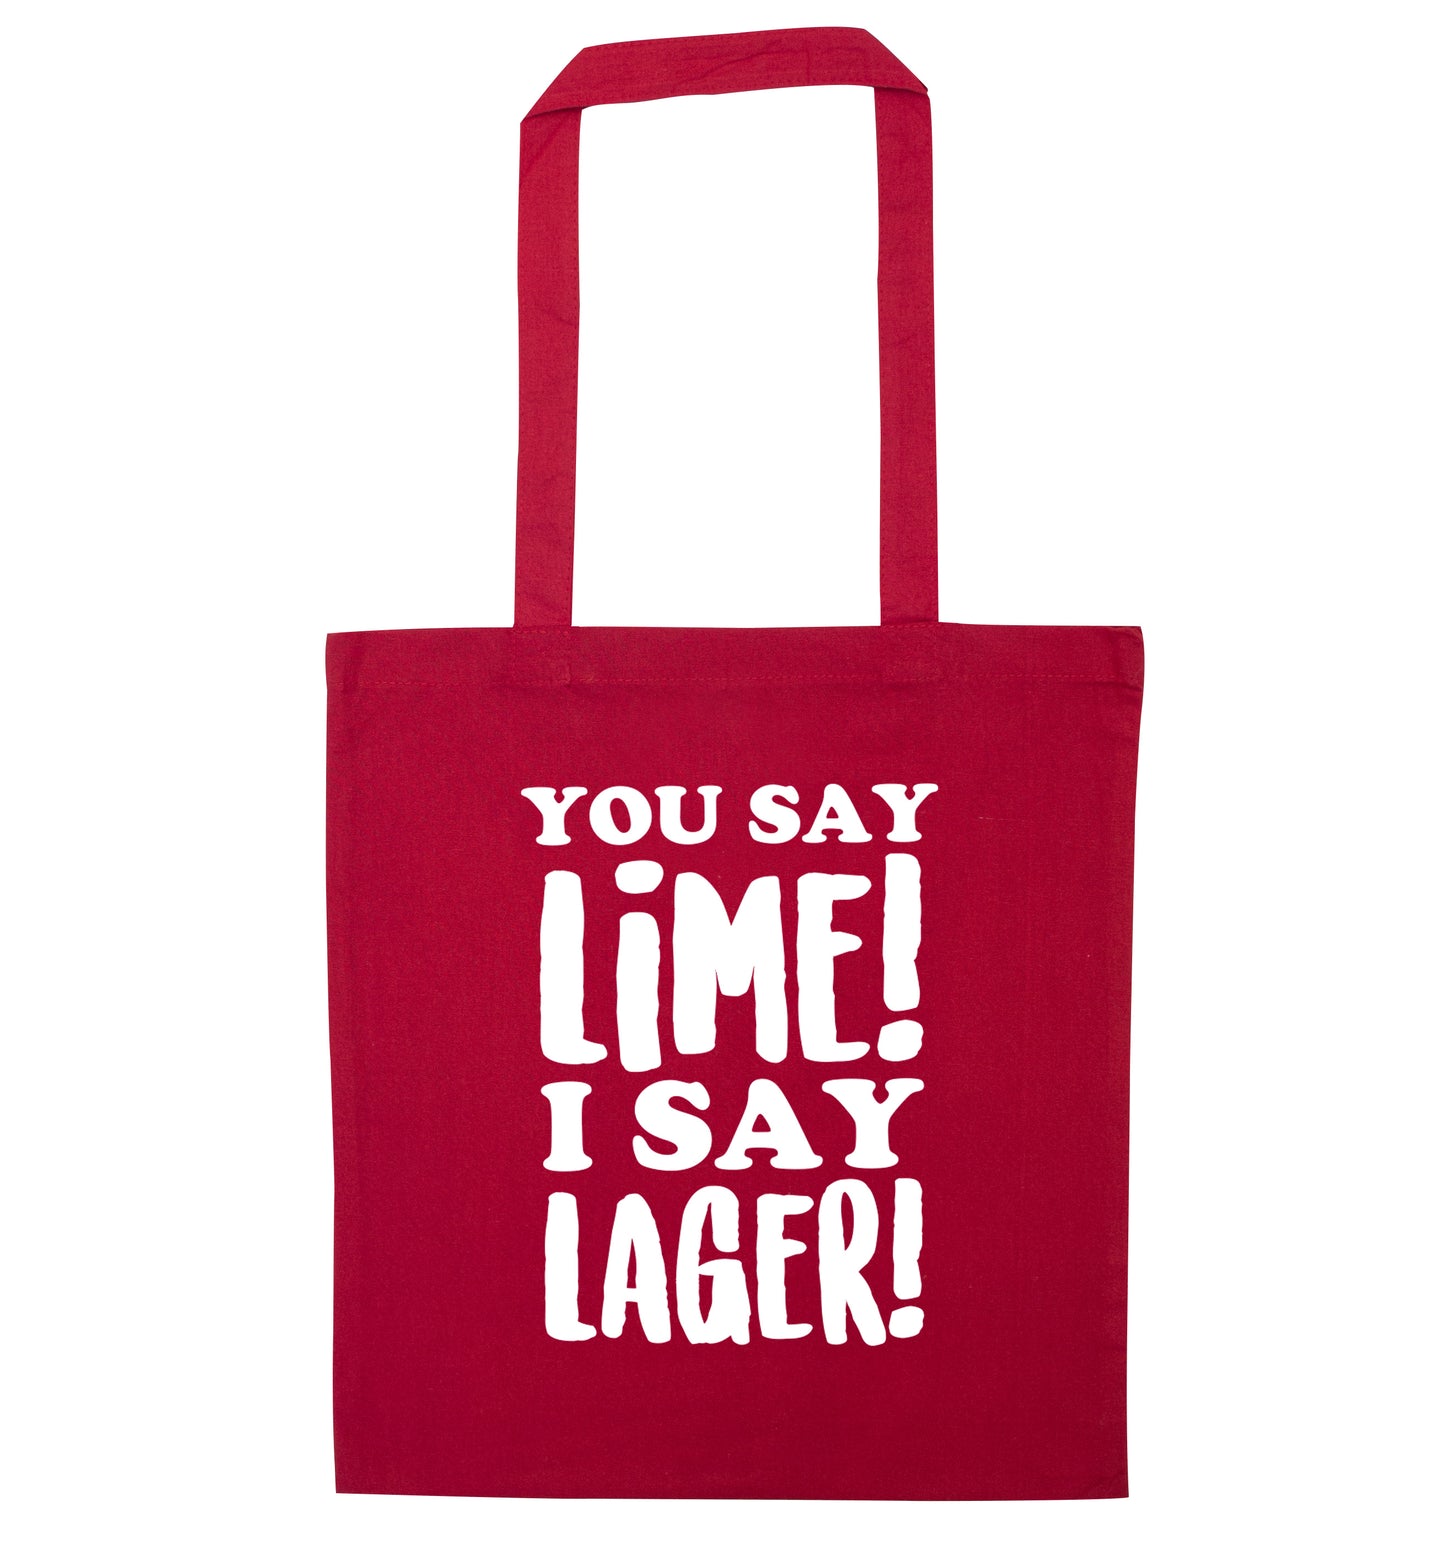 You say lime I say lager! red tote bag